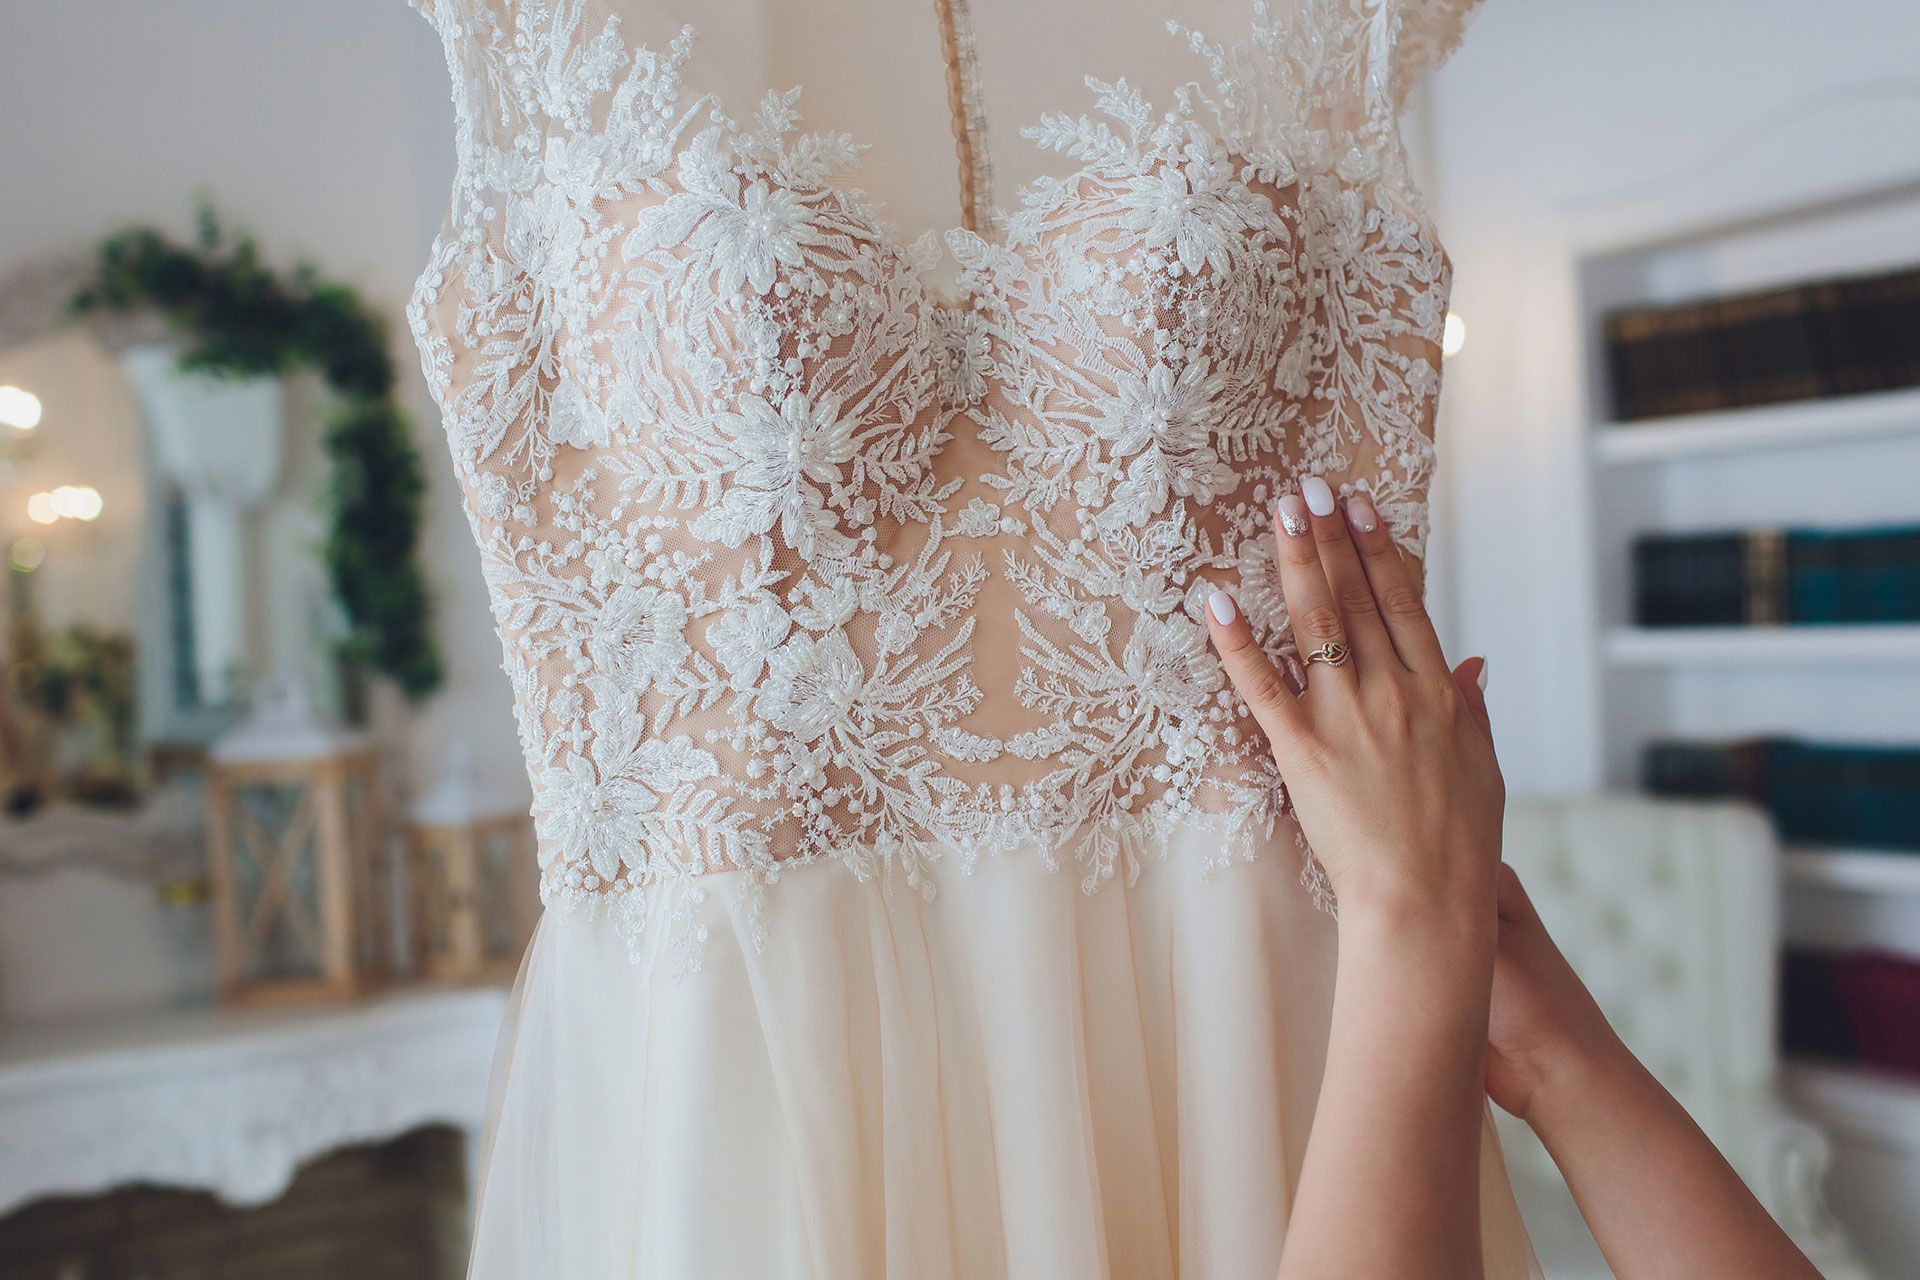 Rich pink wedding dress hangs on a chandelier in a white room